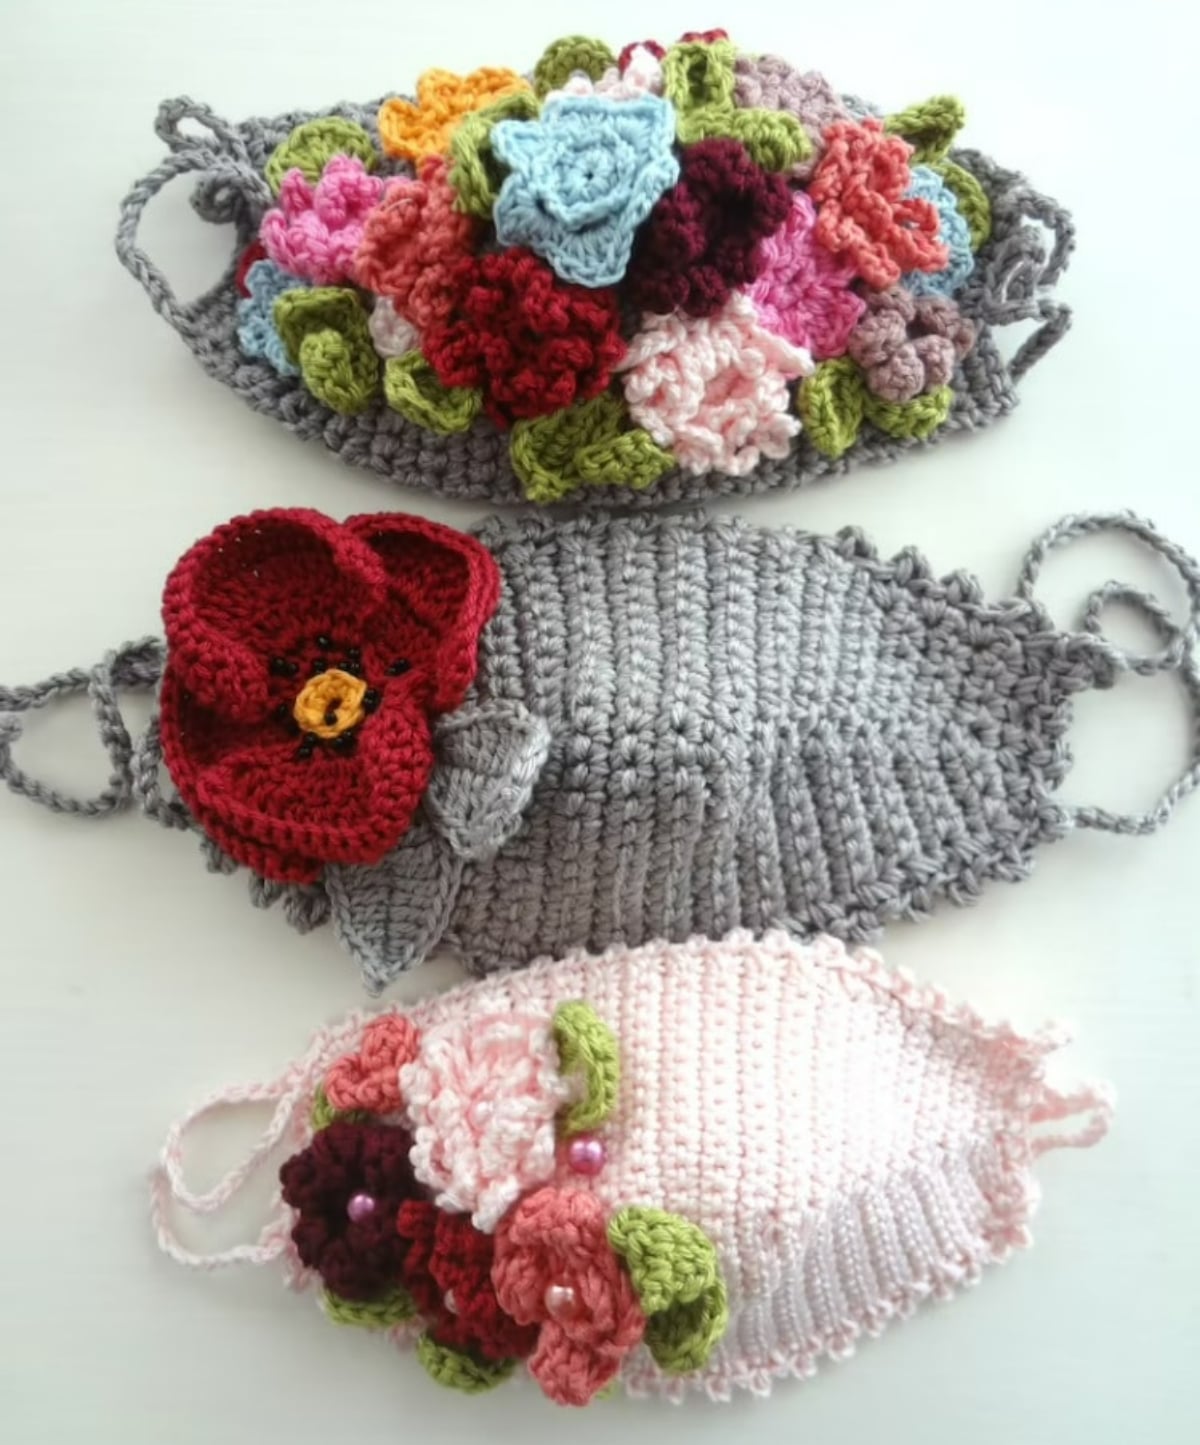 A pale pink crochet face mask with 3-D flowers on the side, a gray face mask with a large flower on the side, and a gray facemask with 3-D flowers all over the front.